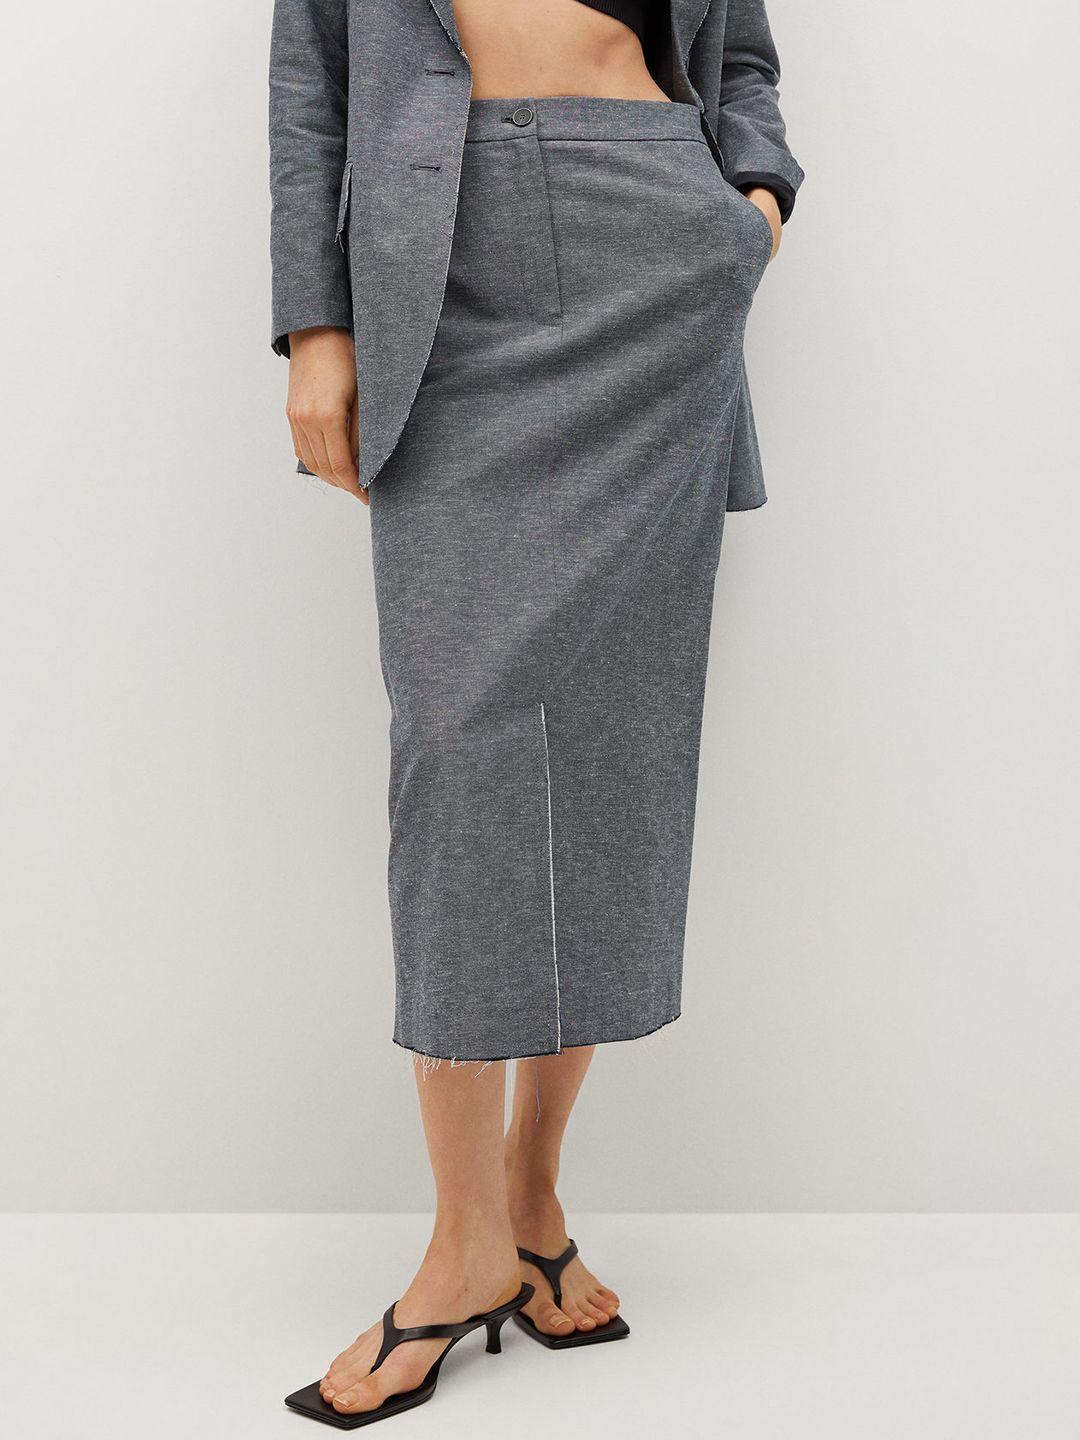 mango women charcoal grey solid sustainable front slit pencil skirt